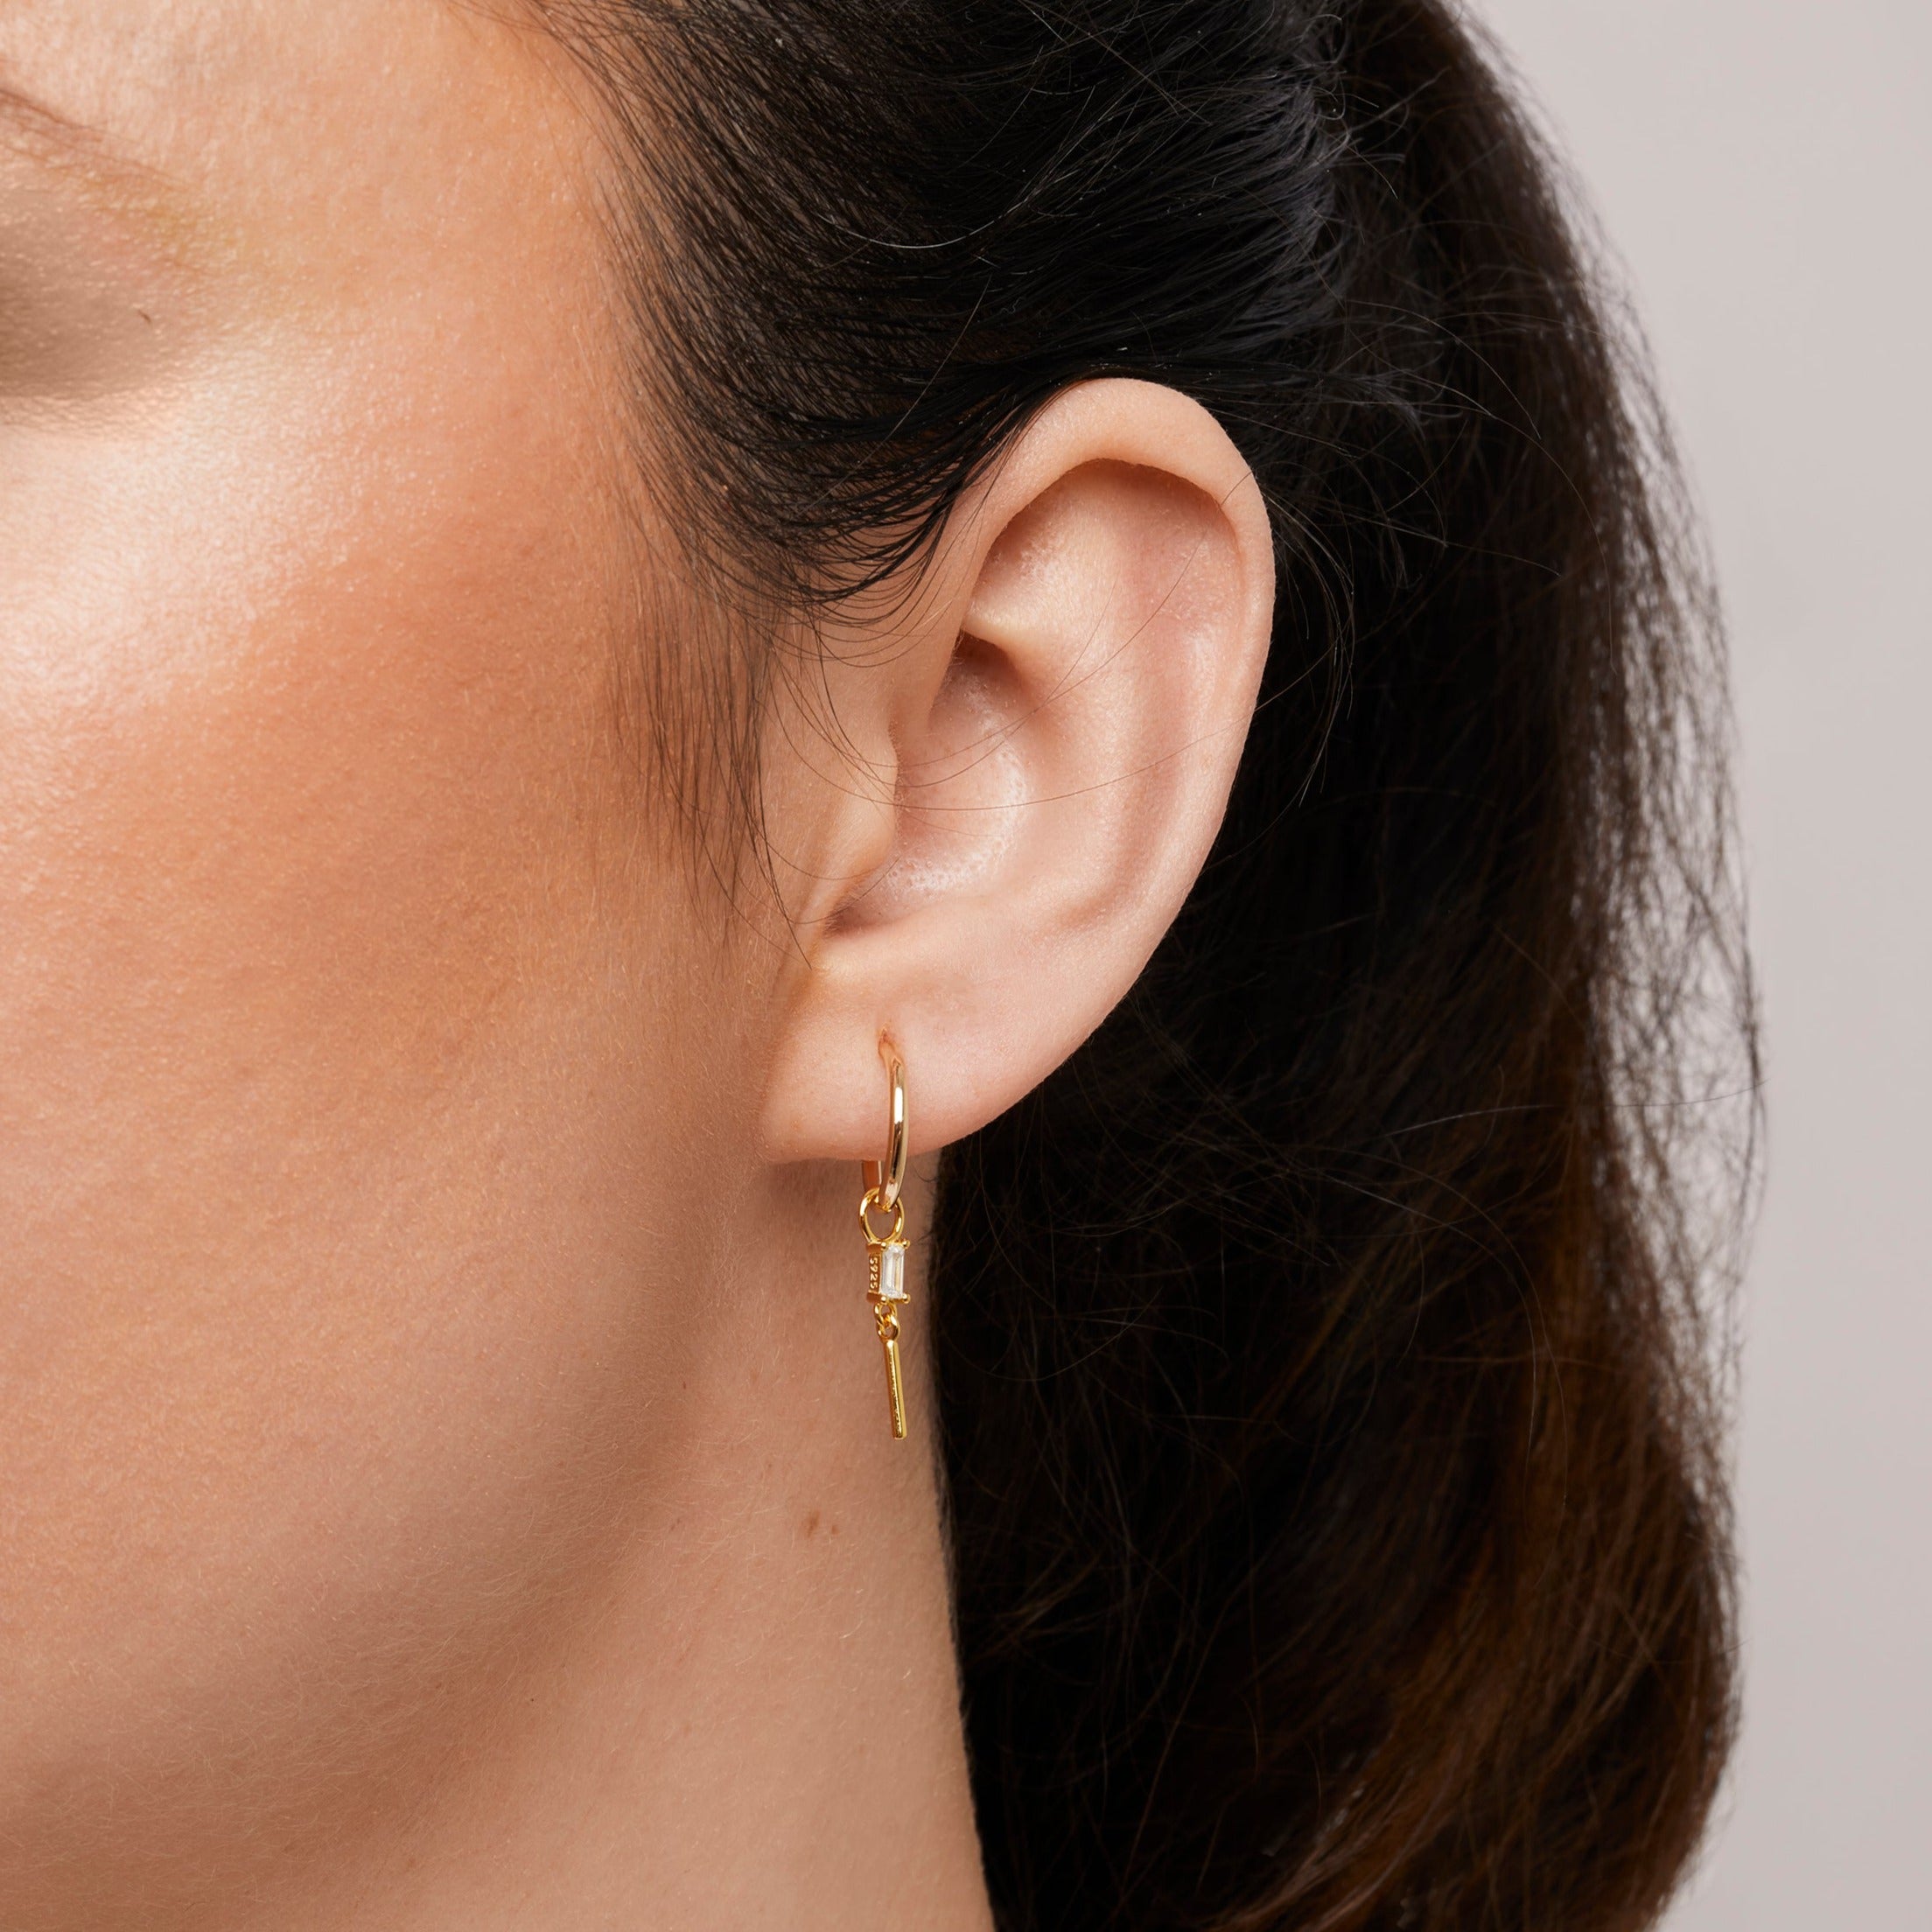 A model wearing the Rectangle Drop Hoop Charms are made with high-quality materials, including 18K gold plating over 925 Sterling Silver. These charms are both non-tarnish and water resistant. The perfect combination of style and durability.